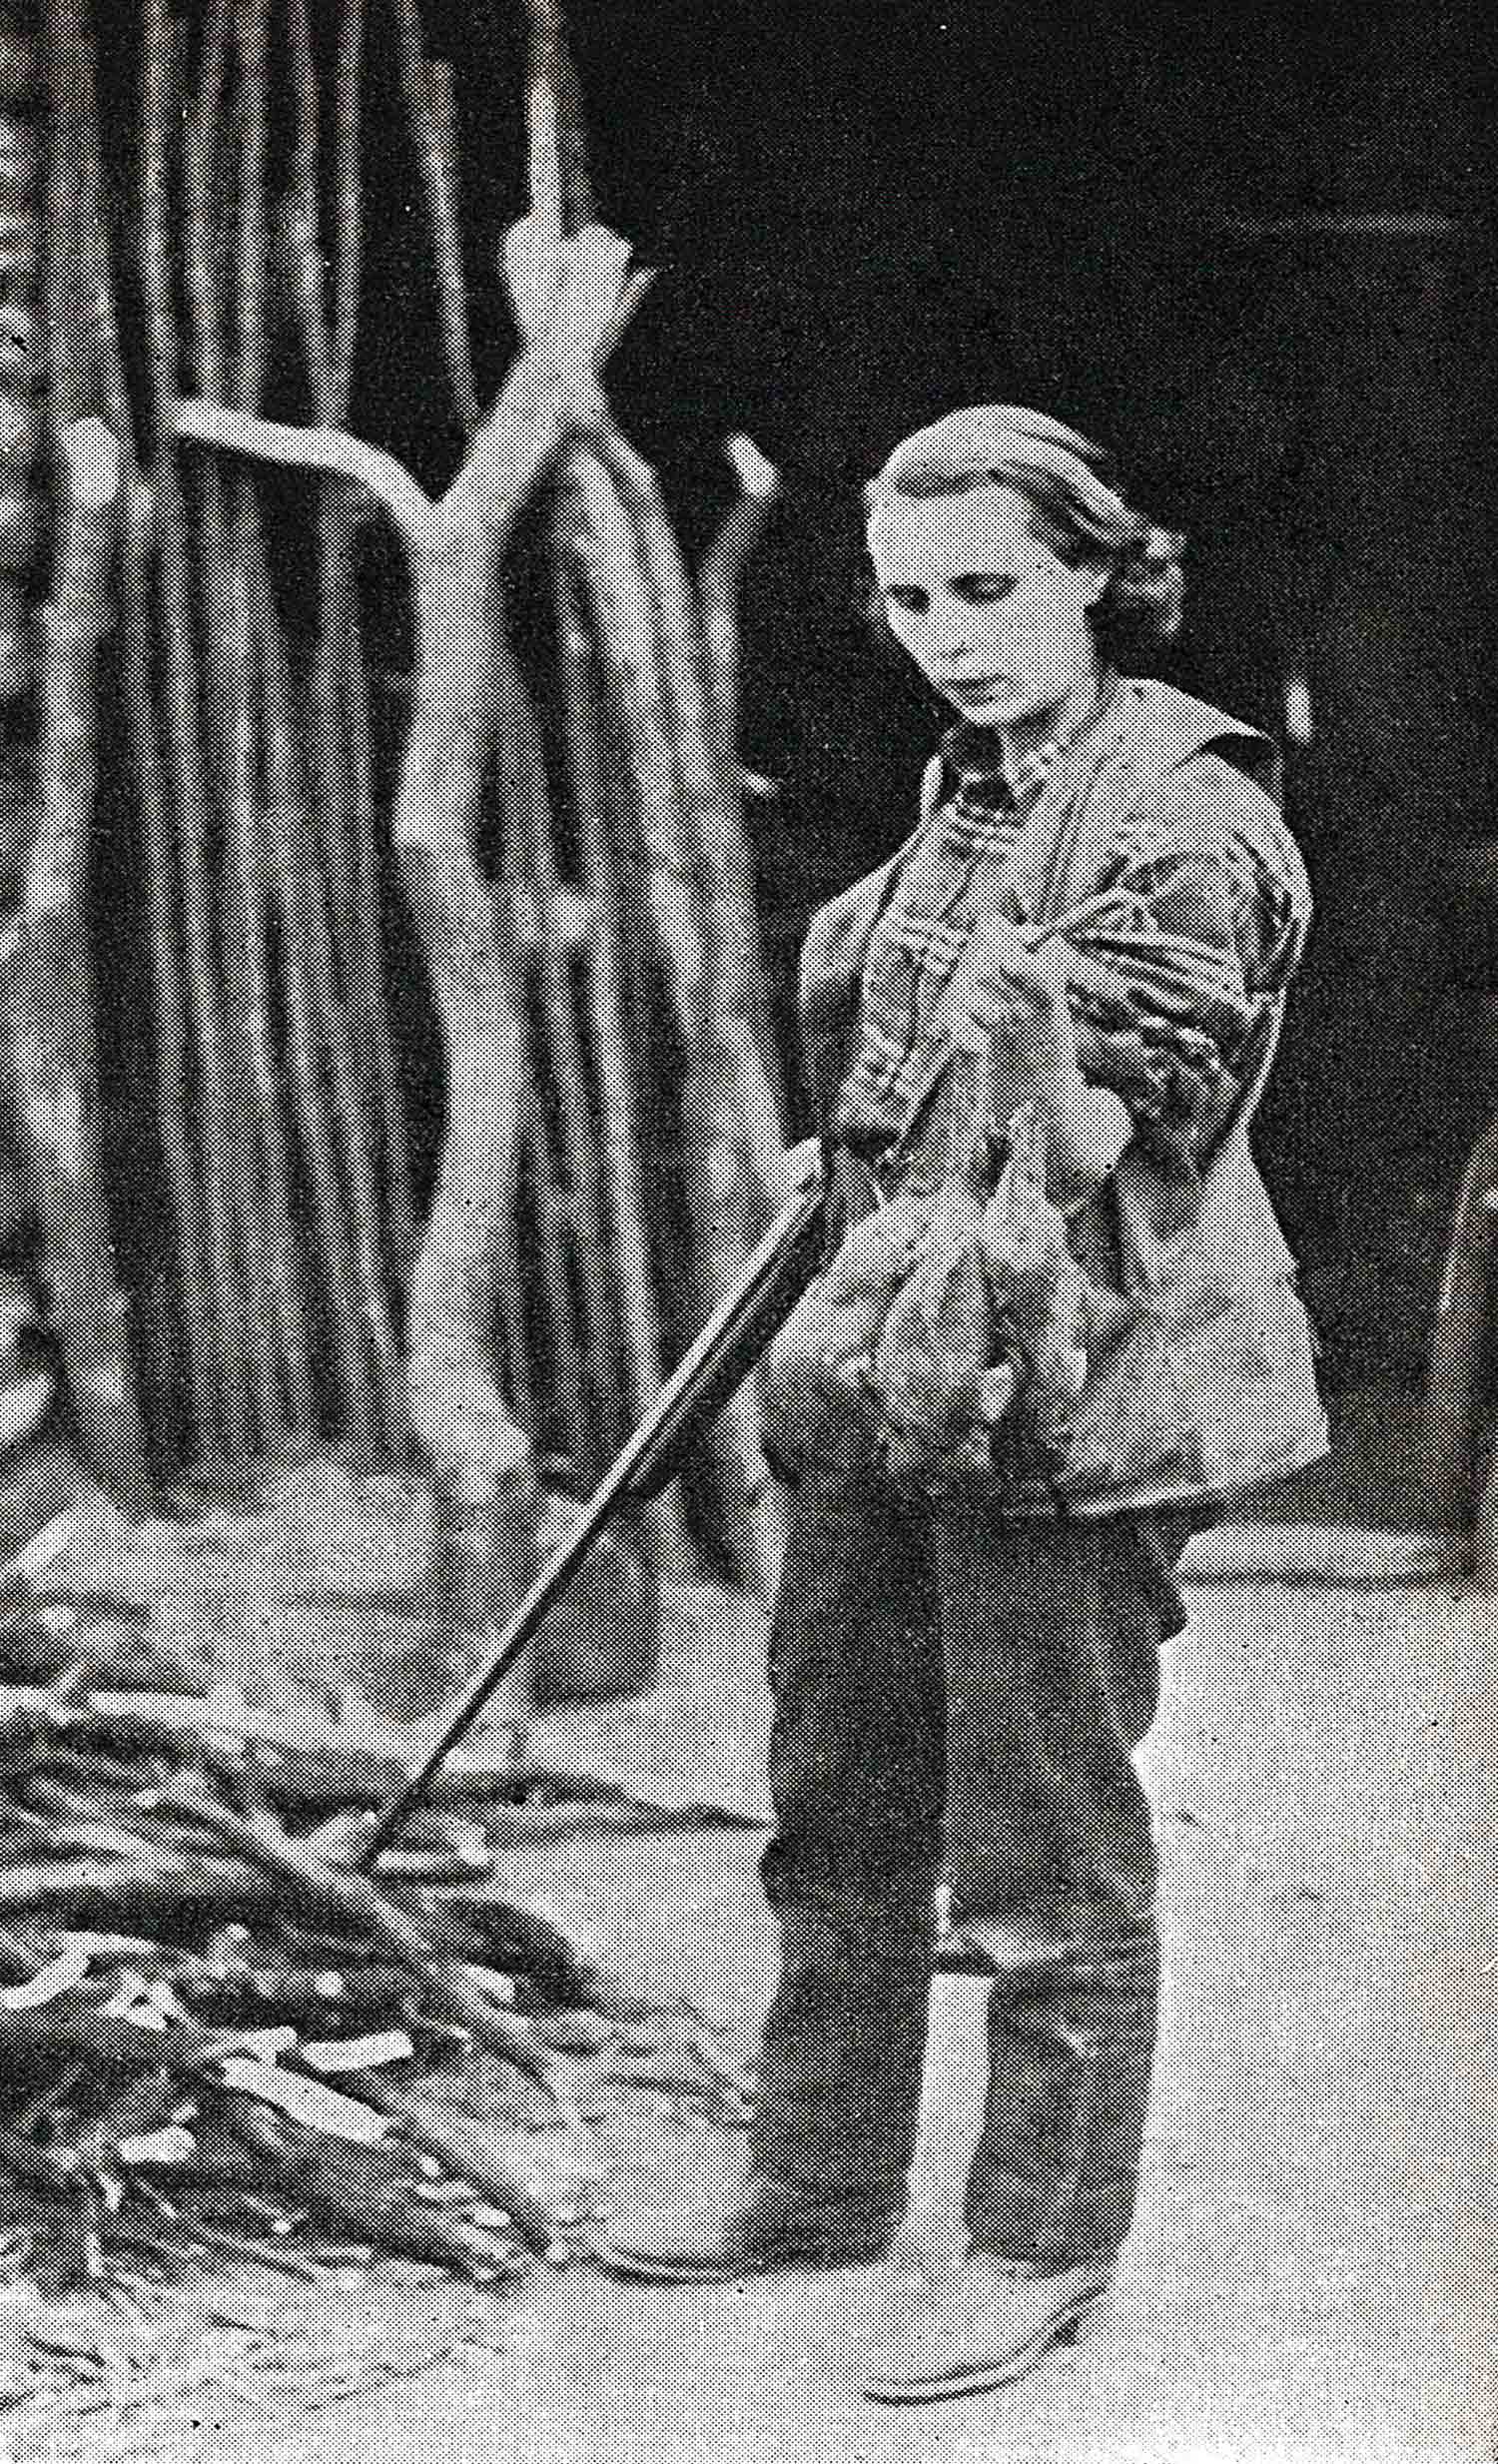 Hunter standing in front of wood pile holds long gun looks down at the quail she has shot. Archival photo.